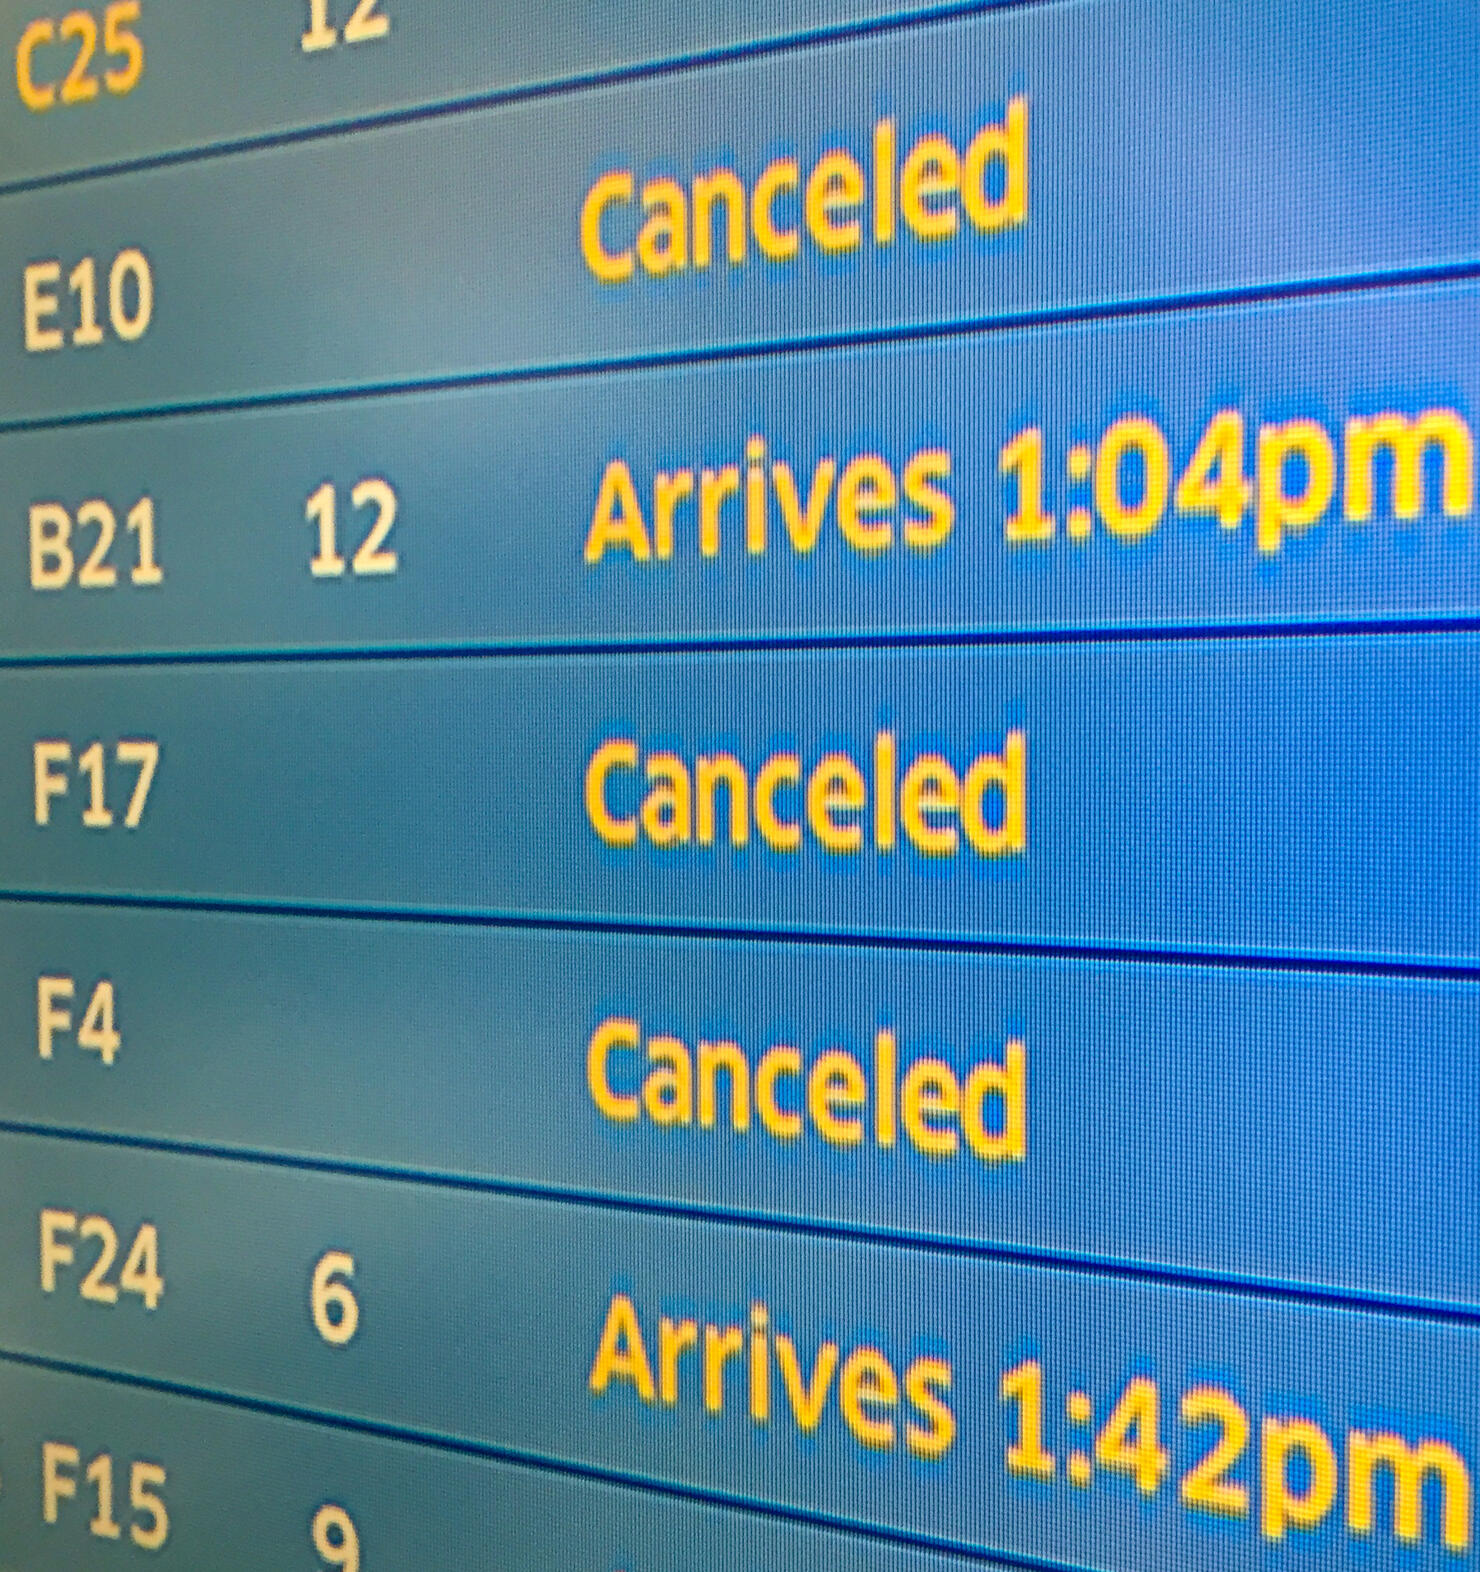 Status Board Indicating Canceled Flights in Chicago